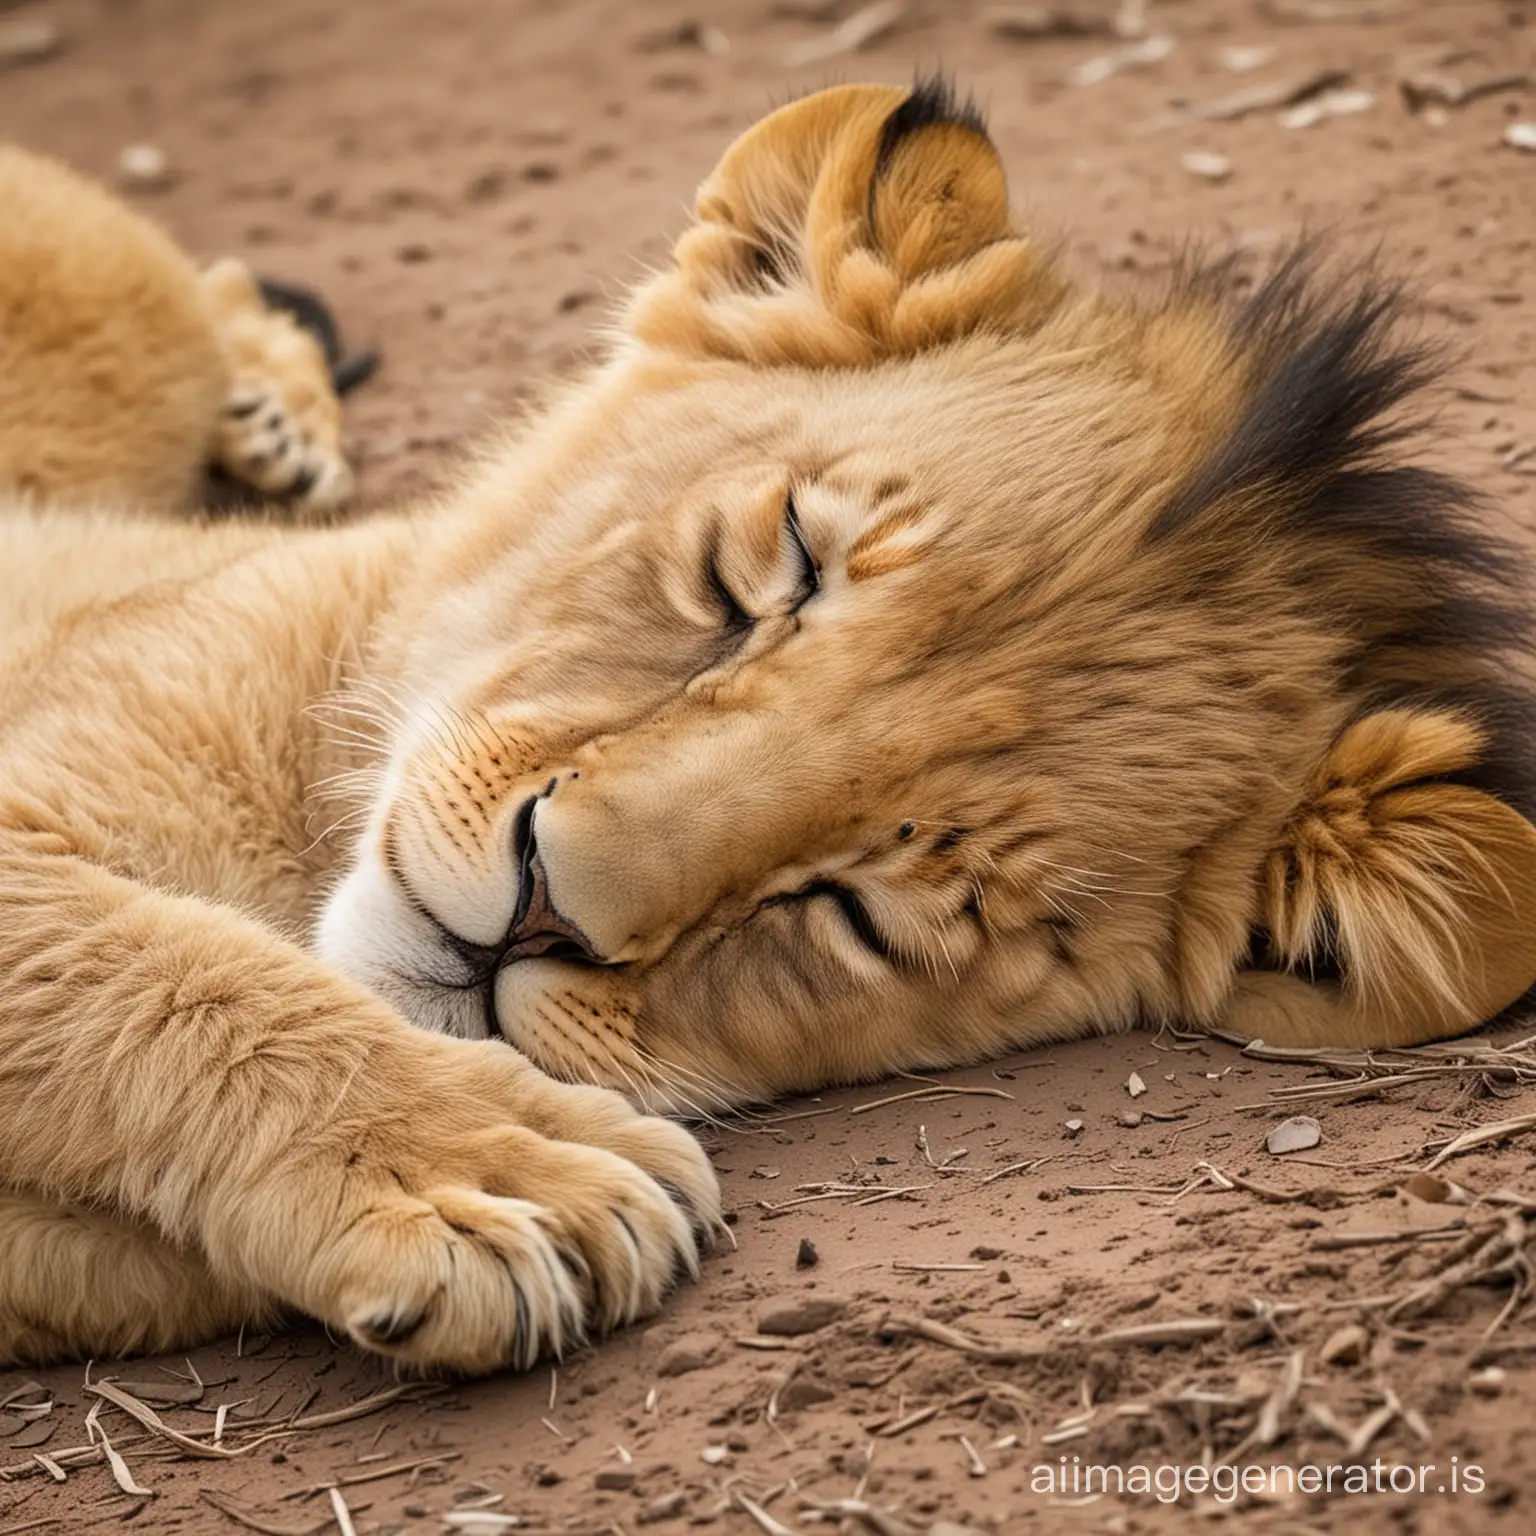 Adorable-Sleeping-Lion-Cub-Resting-Peacefully-in-Natural-Habitat